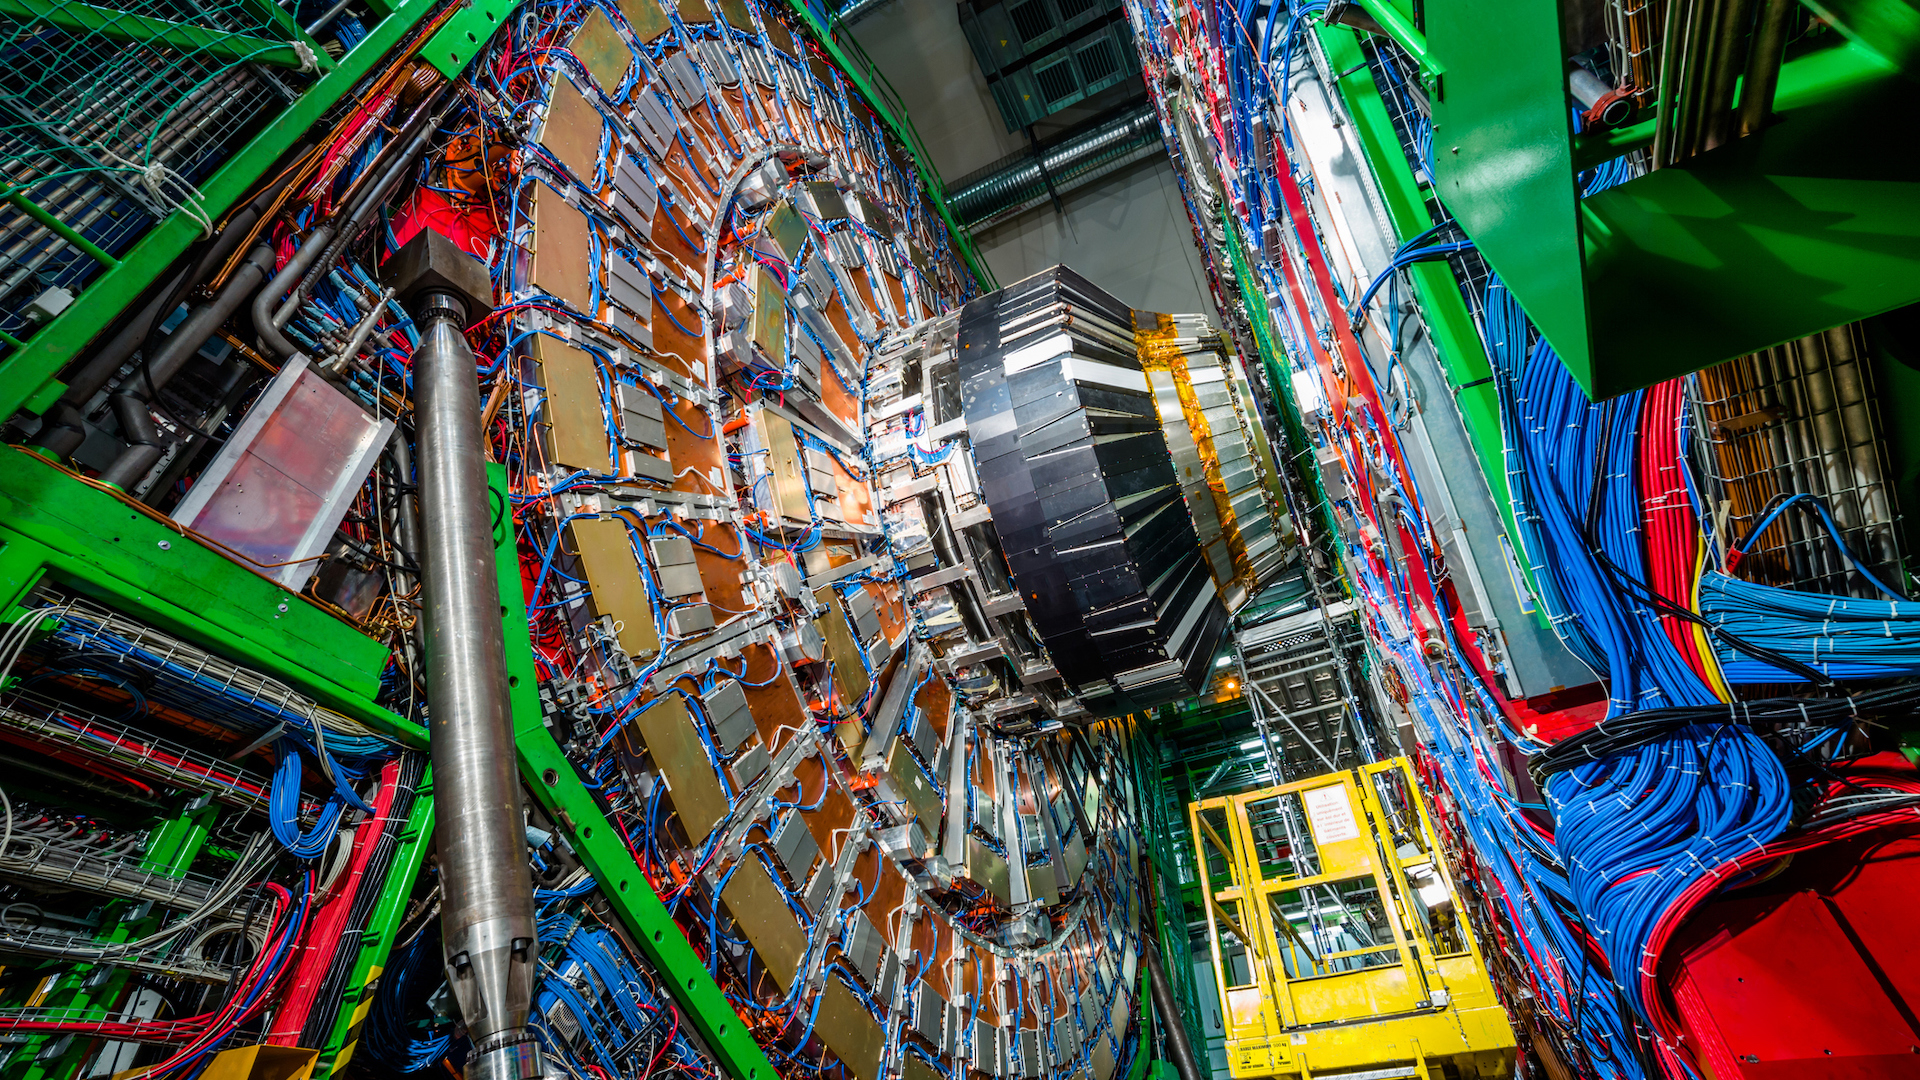 Particle physics experiment at LHC zeroes in on magnetic monopoles [Video]